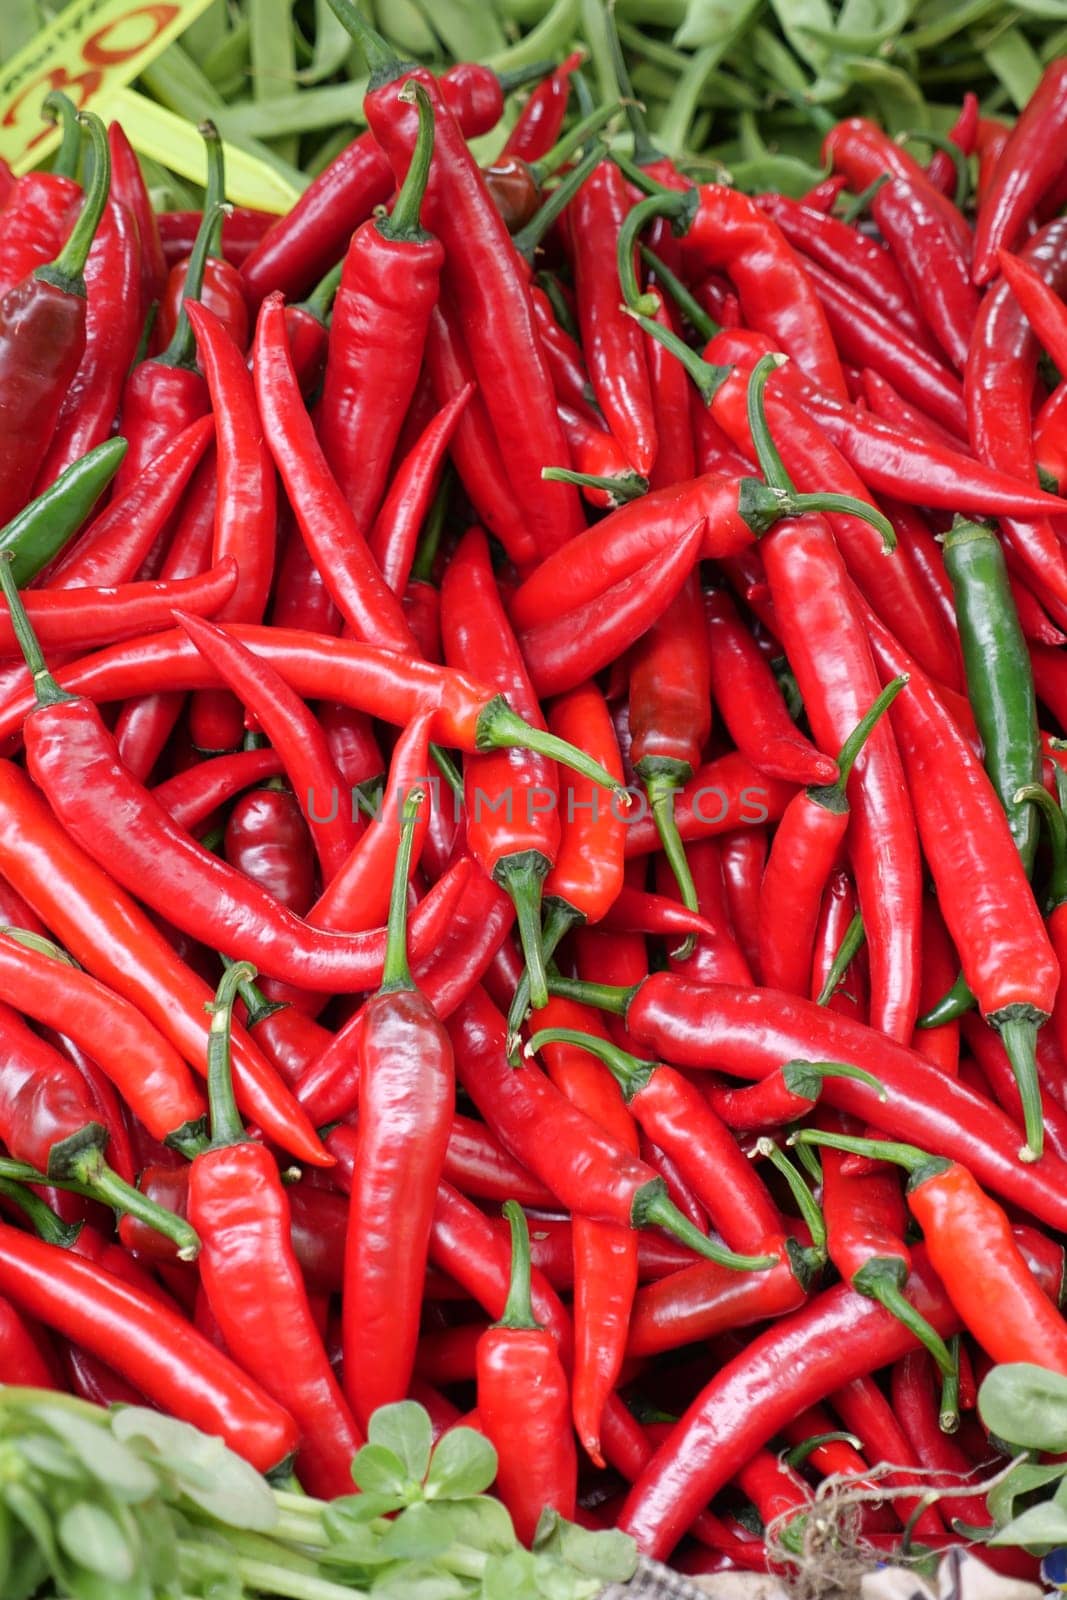 red chili pepper display for sale in singapore retail market ,